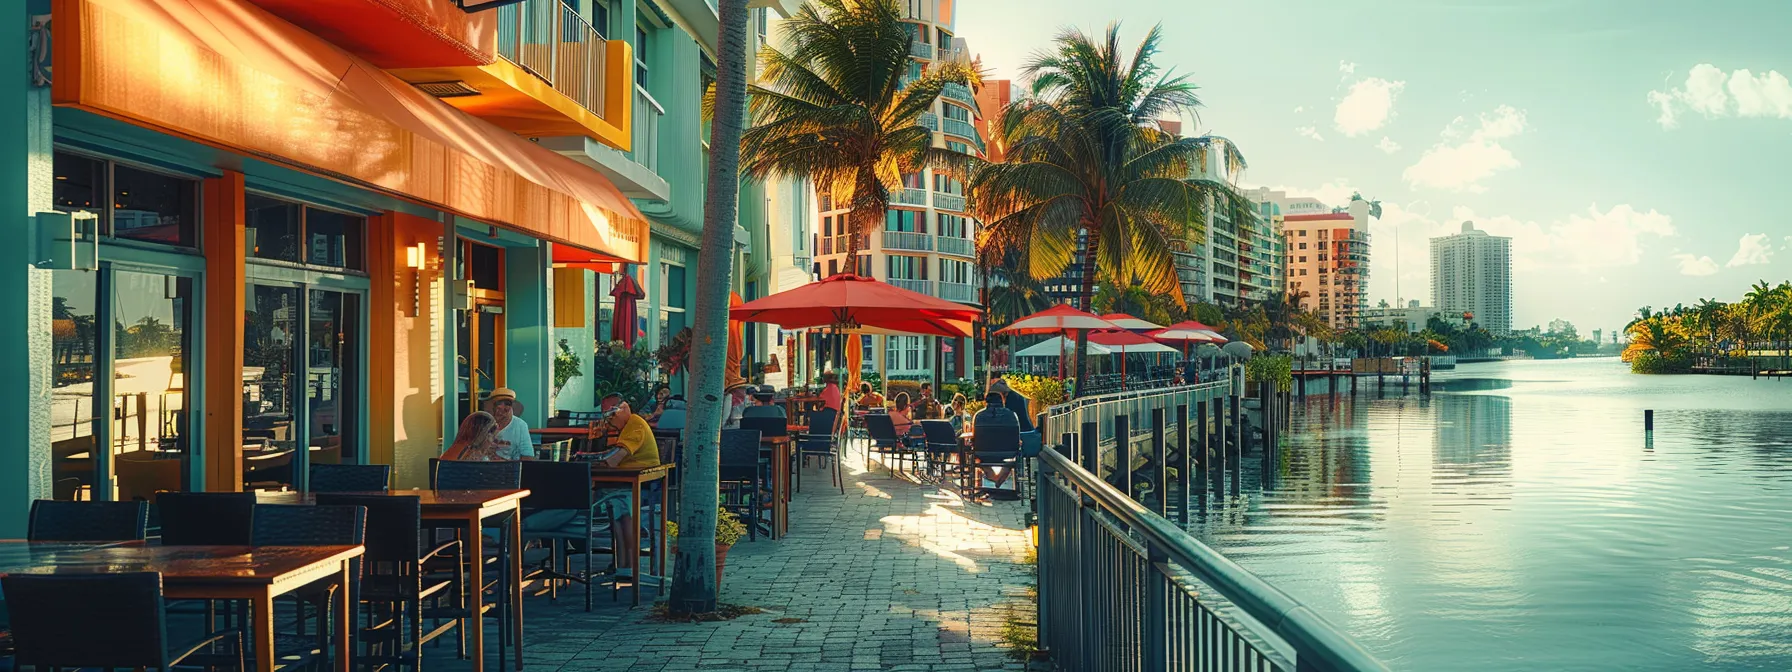 brightly colored buildings lining the miami shoreline as a couple discusses mortgage refinancing options in a cozy cafe.